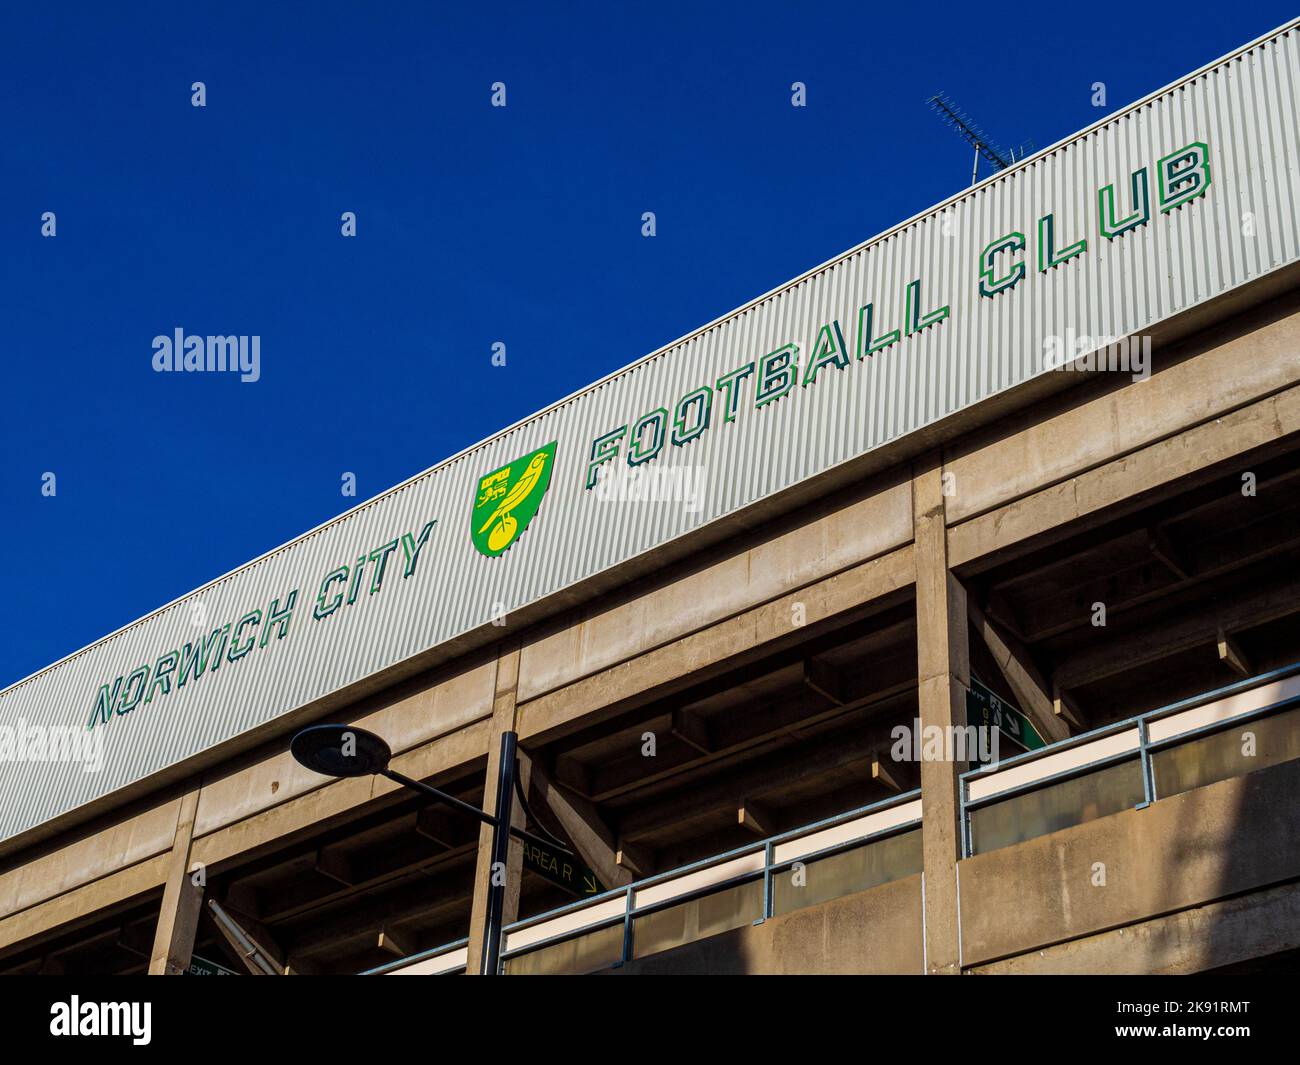 Norwich City Football Club - Norwich City Football Club Carrow Road Ground. Norwich City FC Carrow Rd. The stadium opened in 1935. Stock Photo